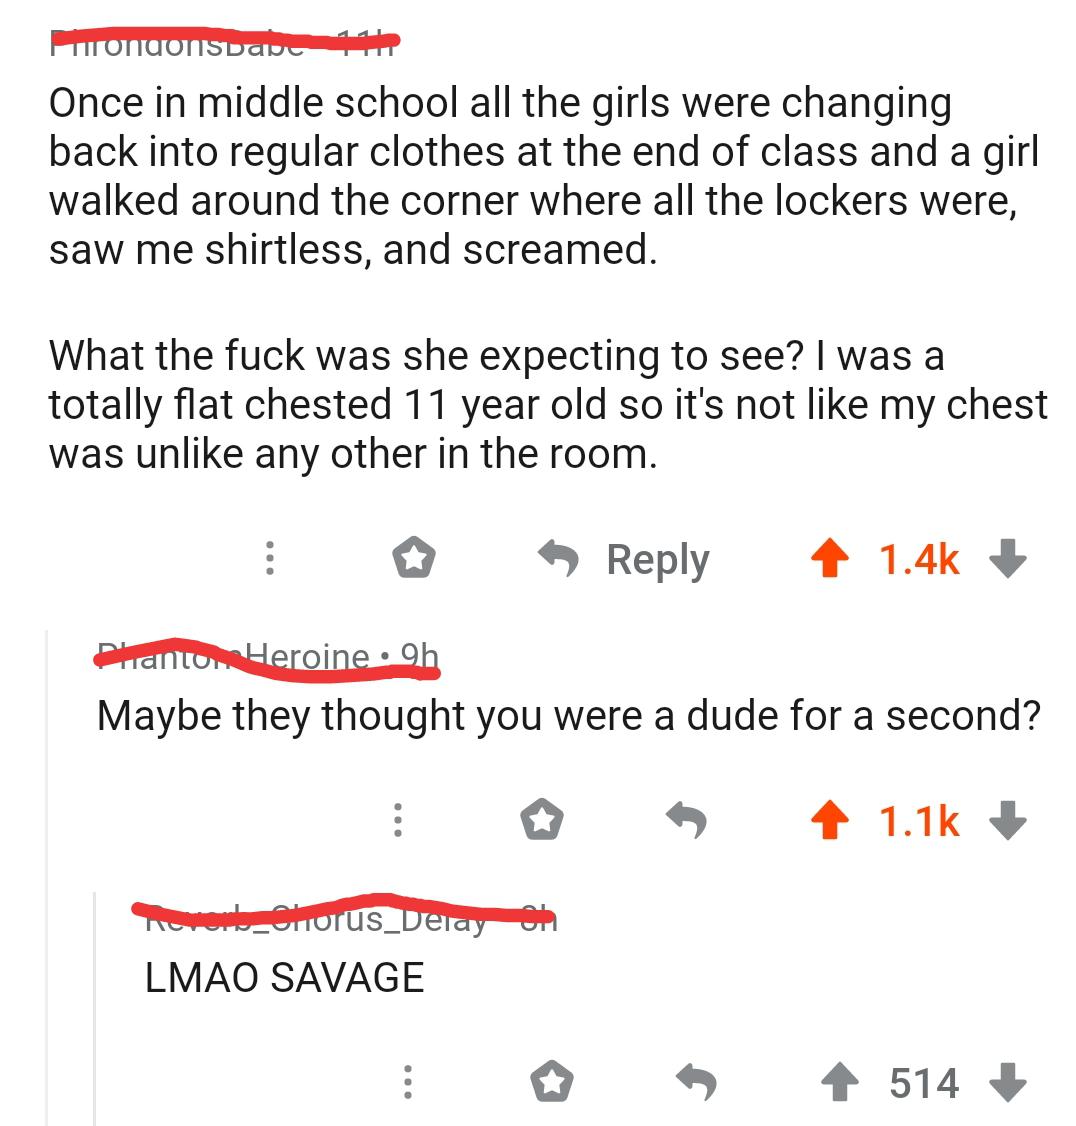 angle - uondonsbad 1 Once in middle school all the girls were changing back into regular clothes at the end of class and a girl walked around the corner where all the lockers were, saw me shirtless, and screamed. What the fuck was she expecting to see? I 